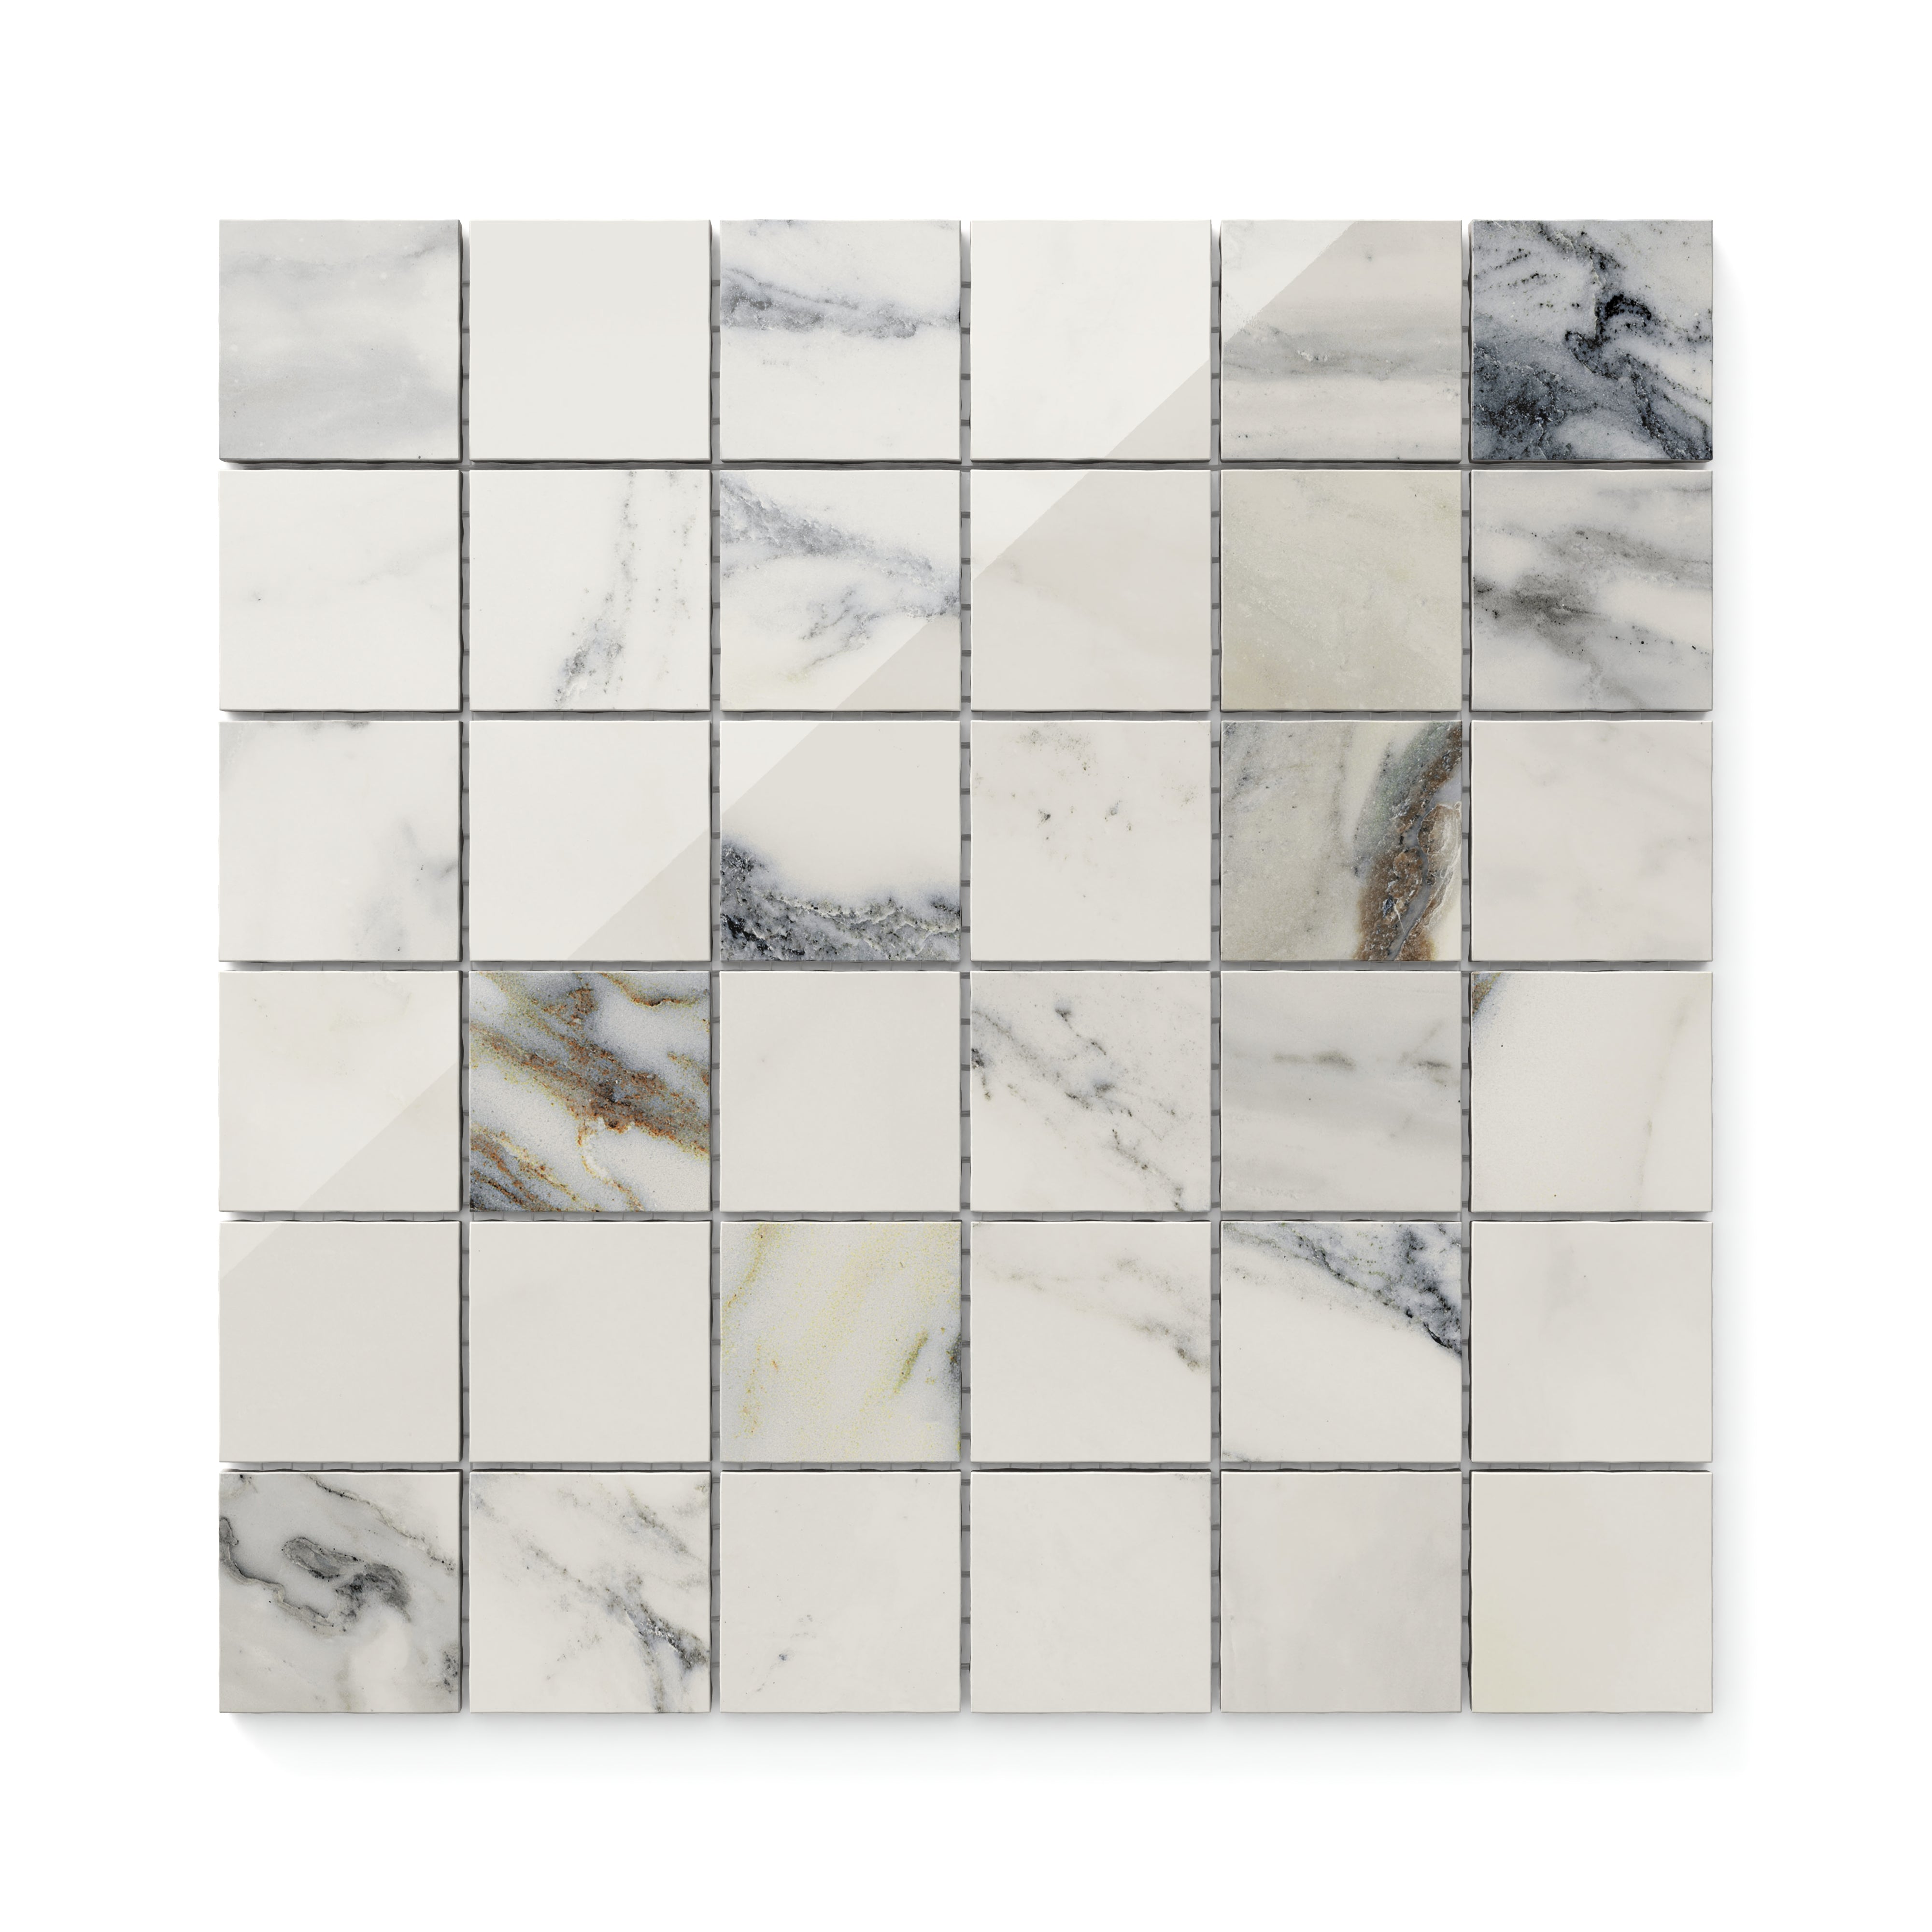 Aniston 2x2 Polished Porcelain Mosaic Tile in Calacatta Antico